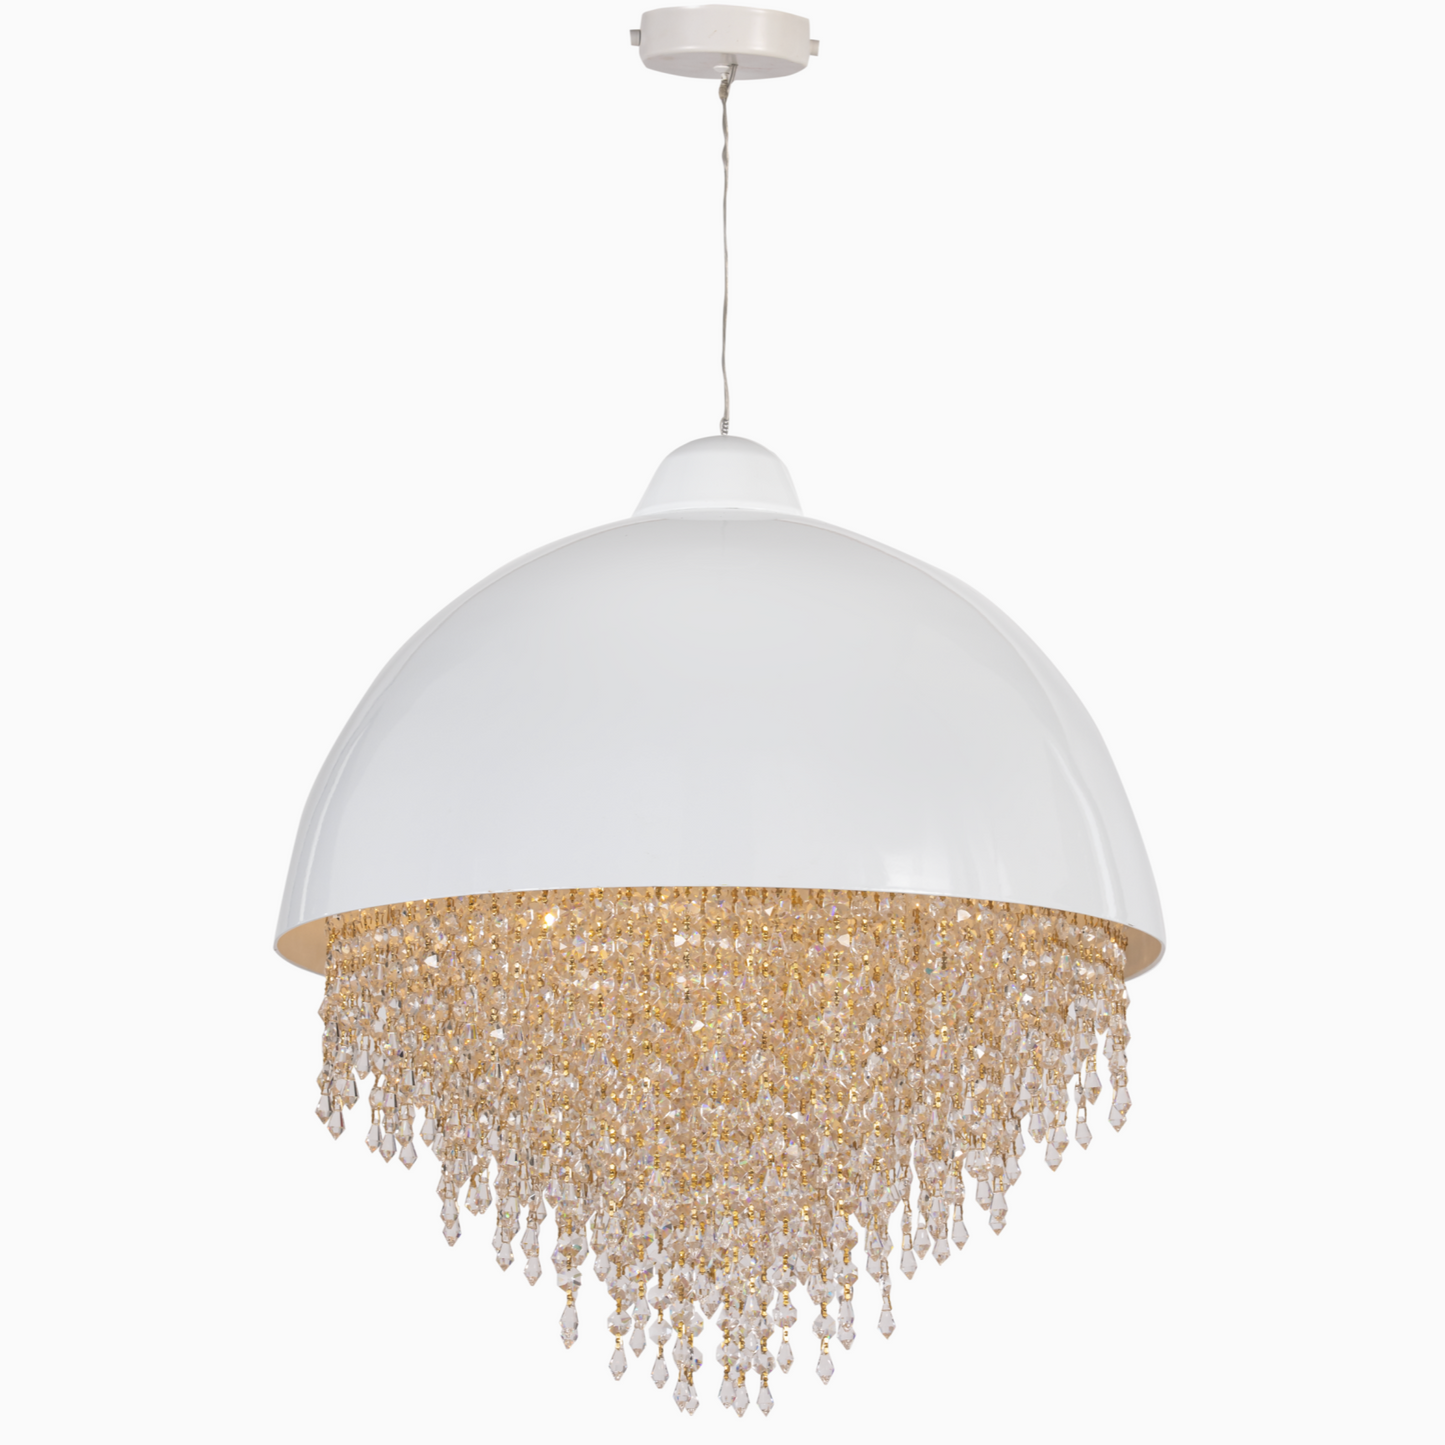 Tiara 5-Light Chandelier by Asfour®